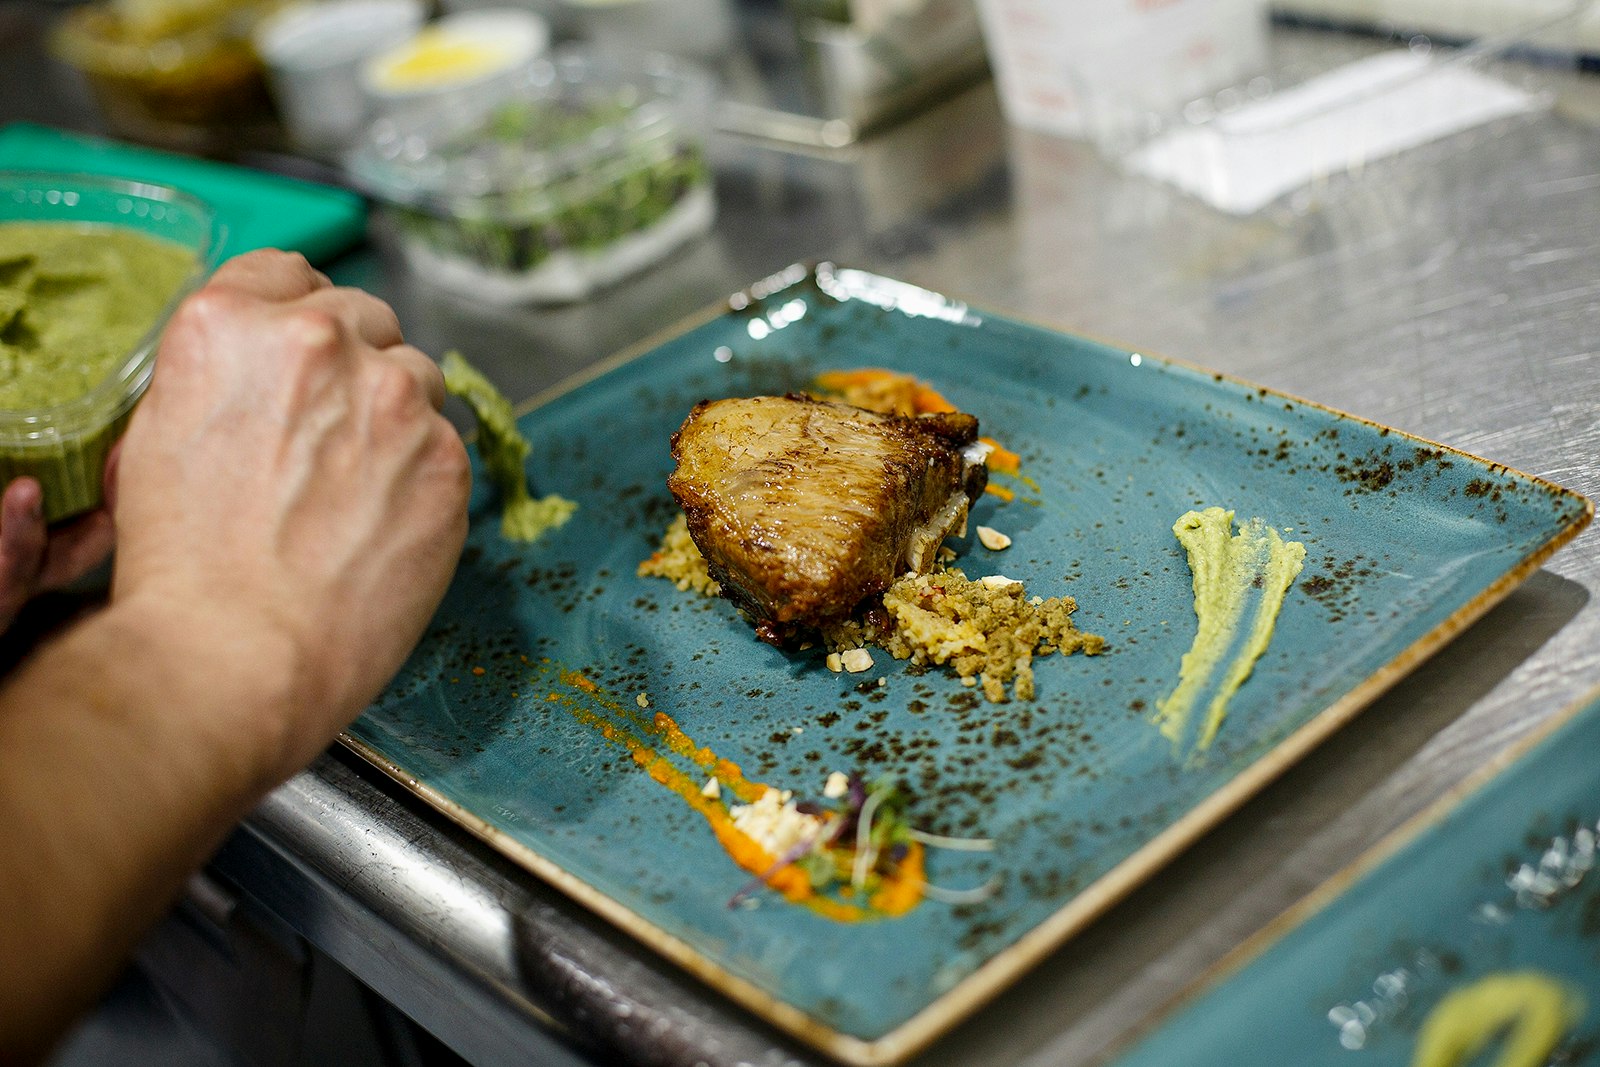 A person uses sauce as a garnish on a plate with cooked tuna. Cádiz, Spain.